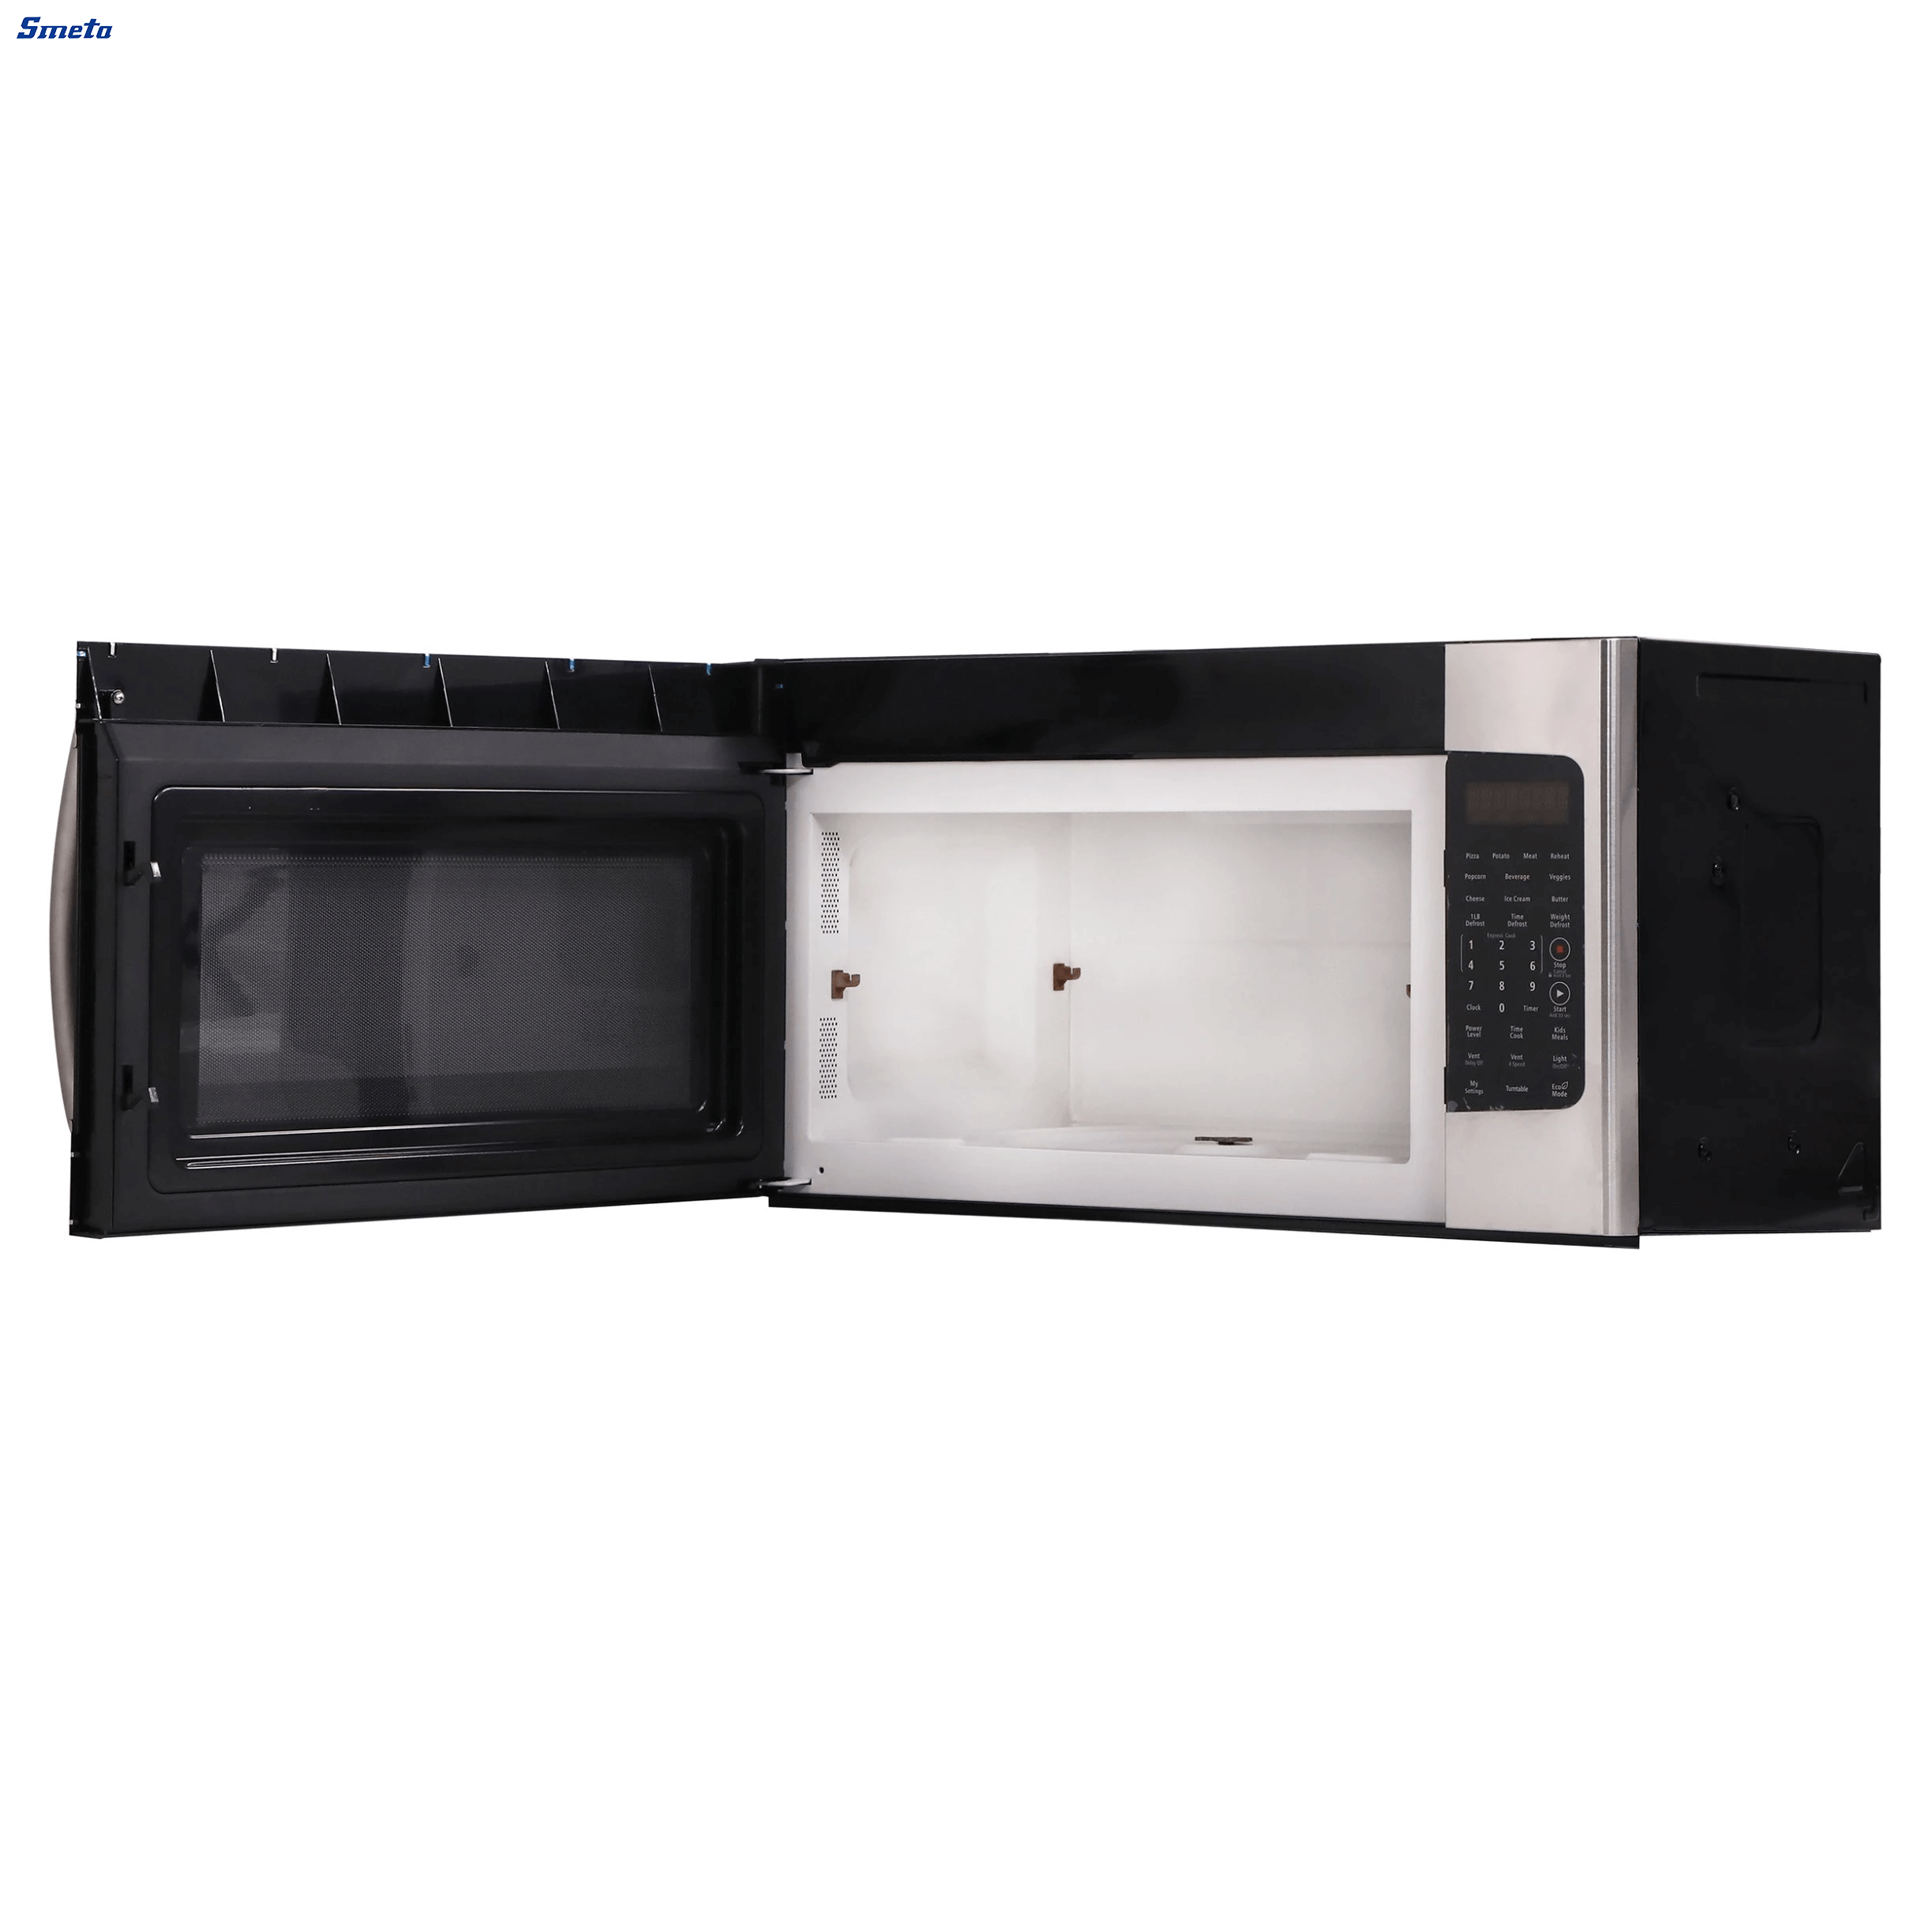 1.6 Cu. Ft. Over-the-Range Stainless Steel Microwave